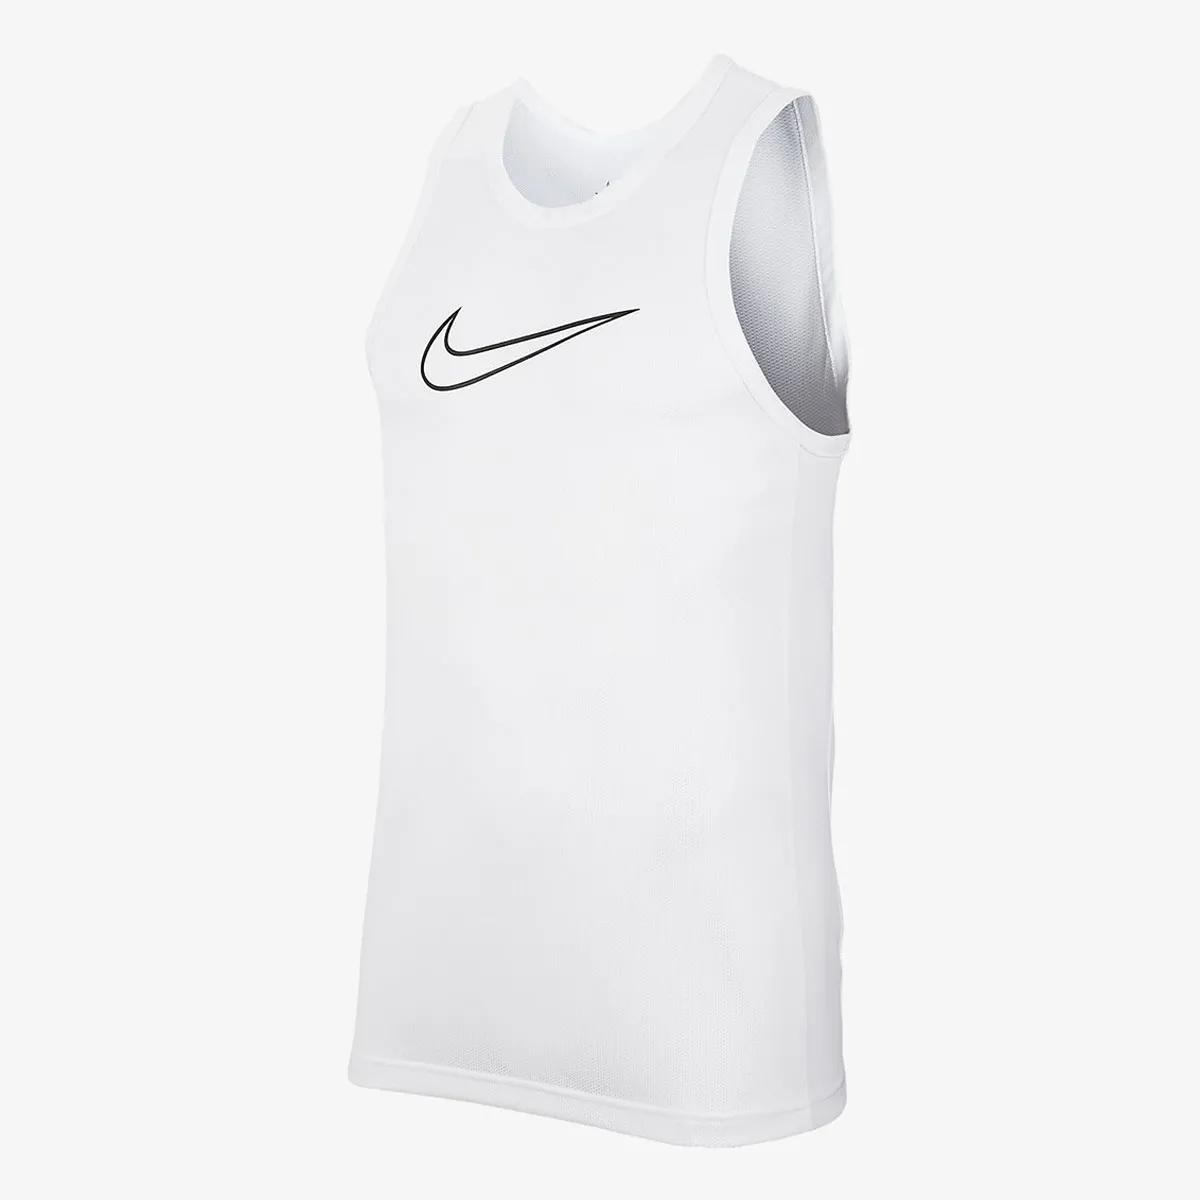 NIKE M NK DF TOP SL CRSSOVER S 